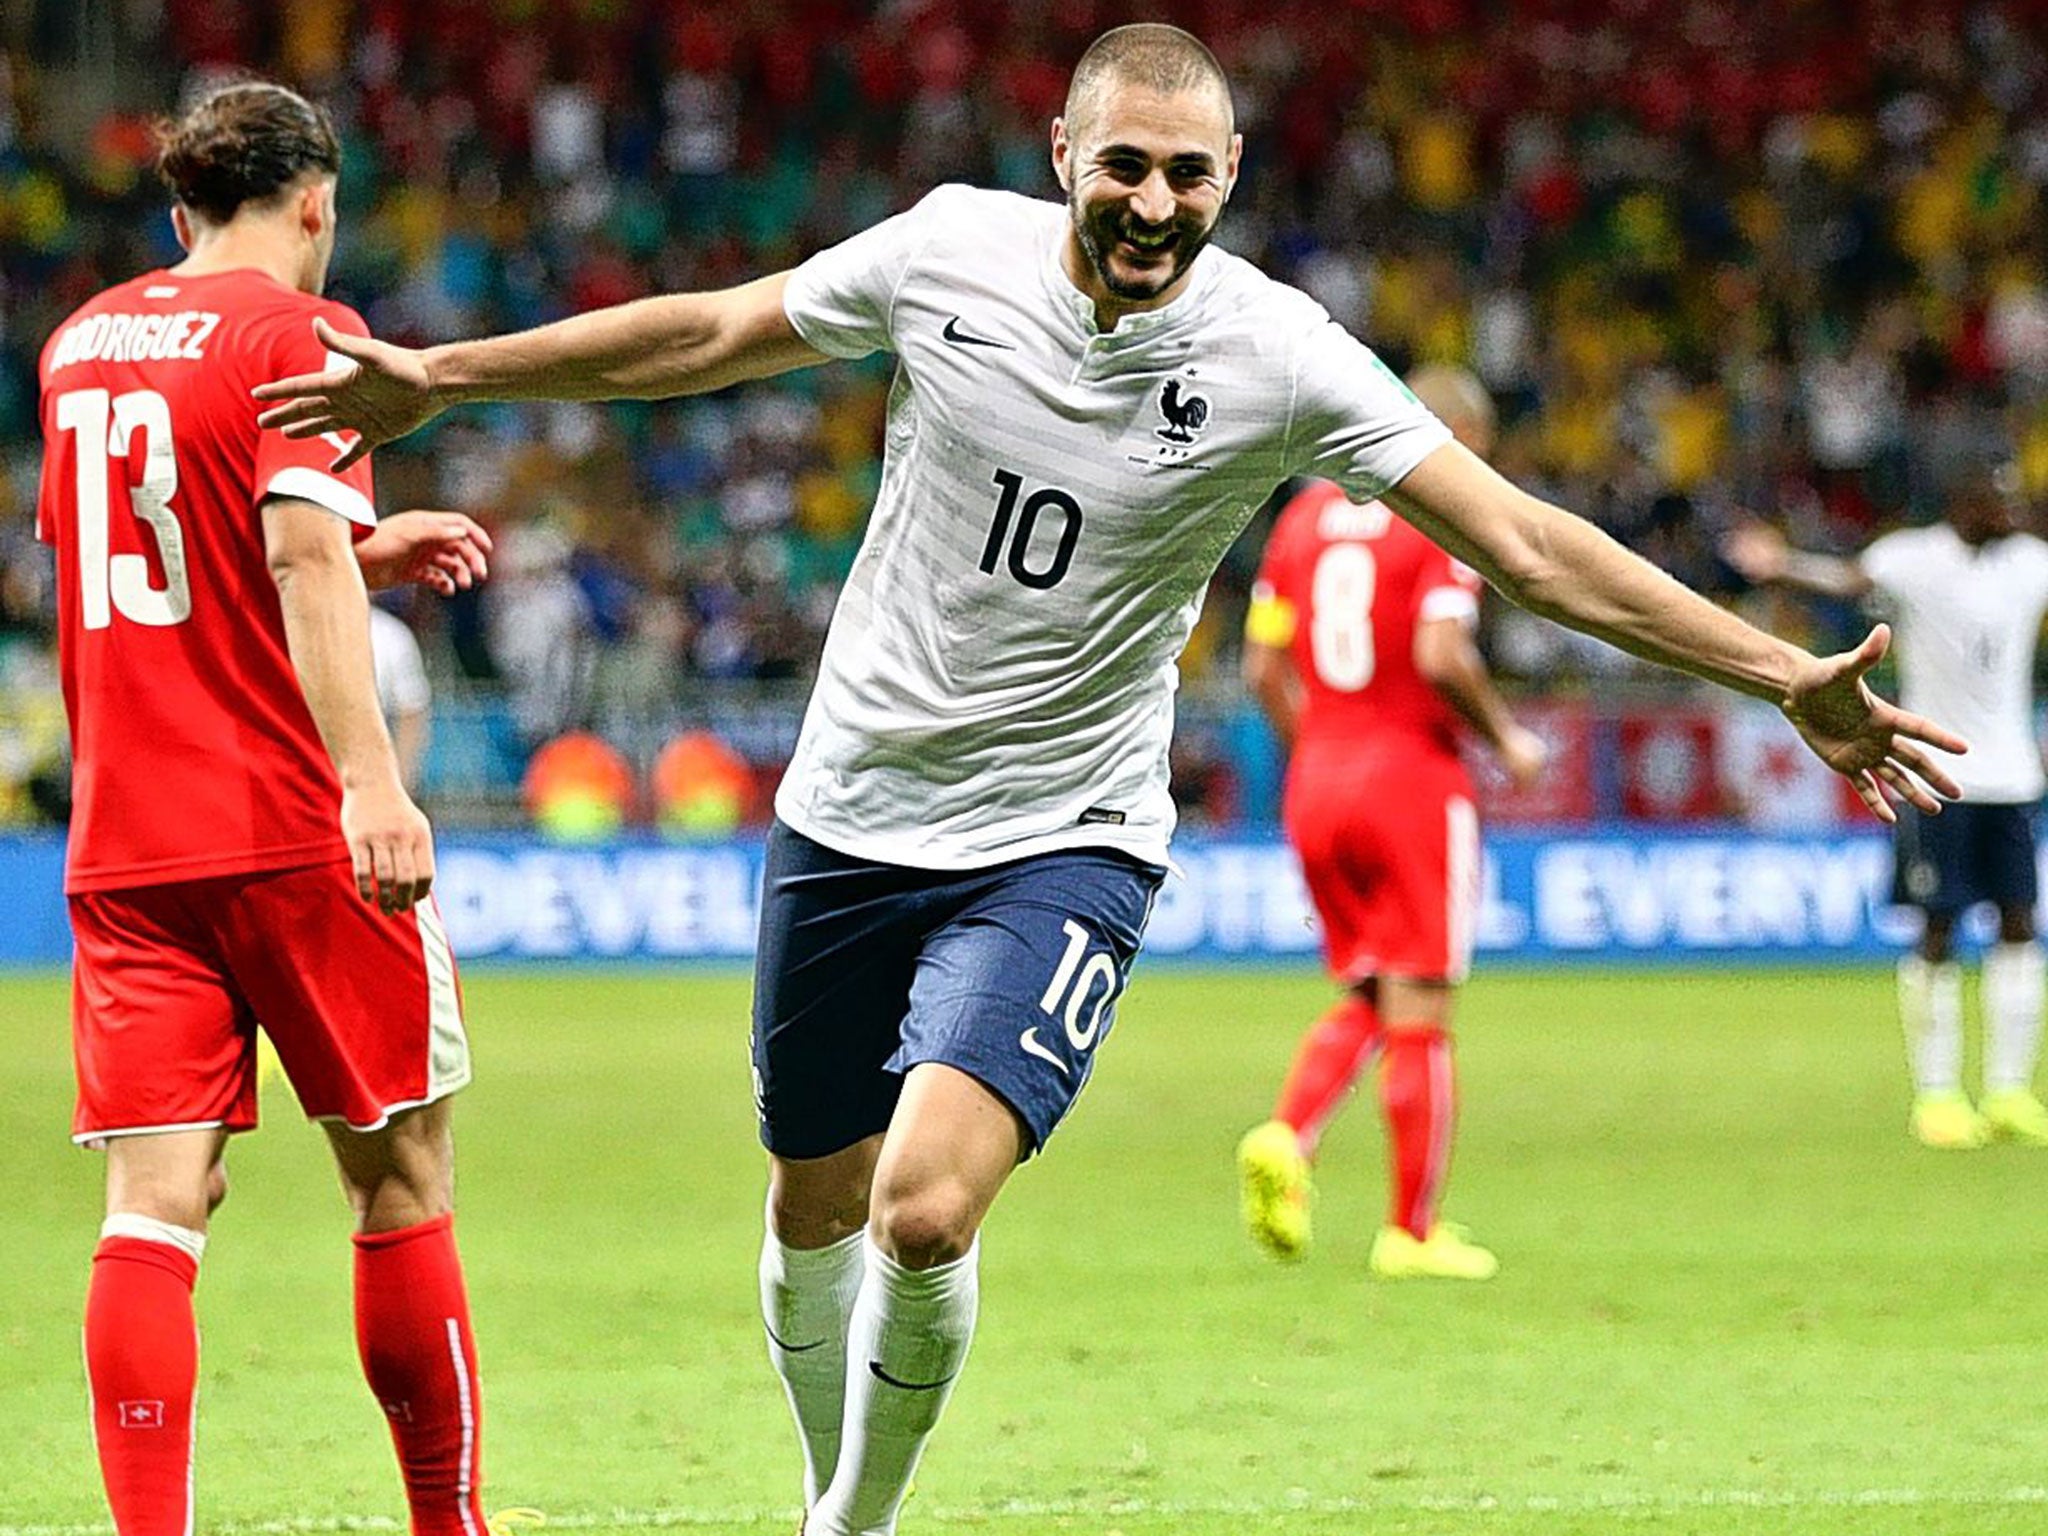 United front: Karim Benzema is enjoying playing with Olivier Giroud under France coach Didier Deschamps